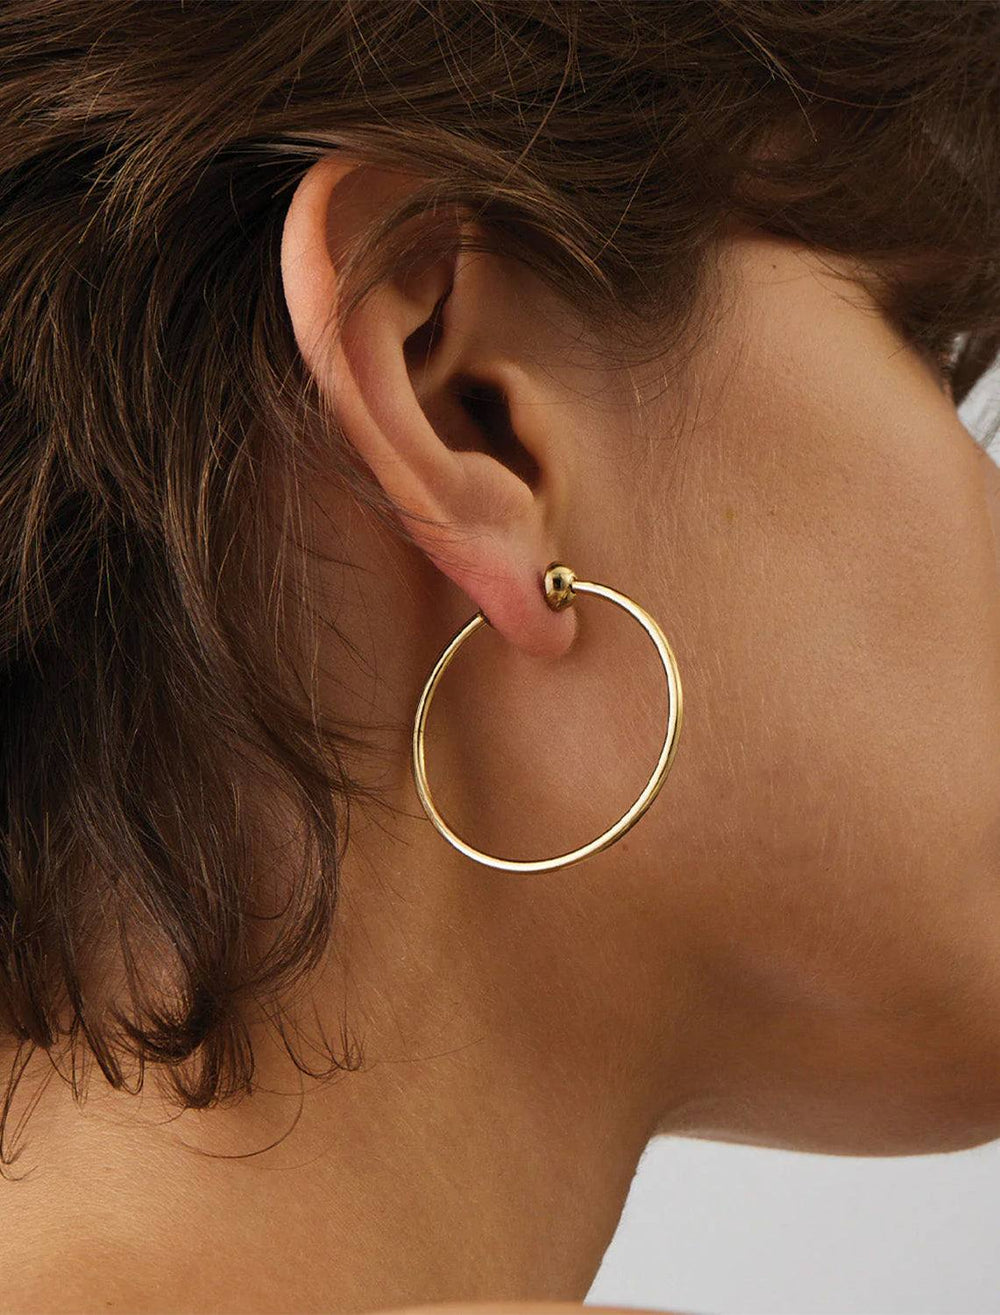 Jenny Bird new icon hoops in gold small - Twigs